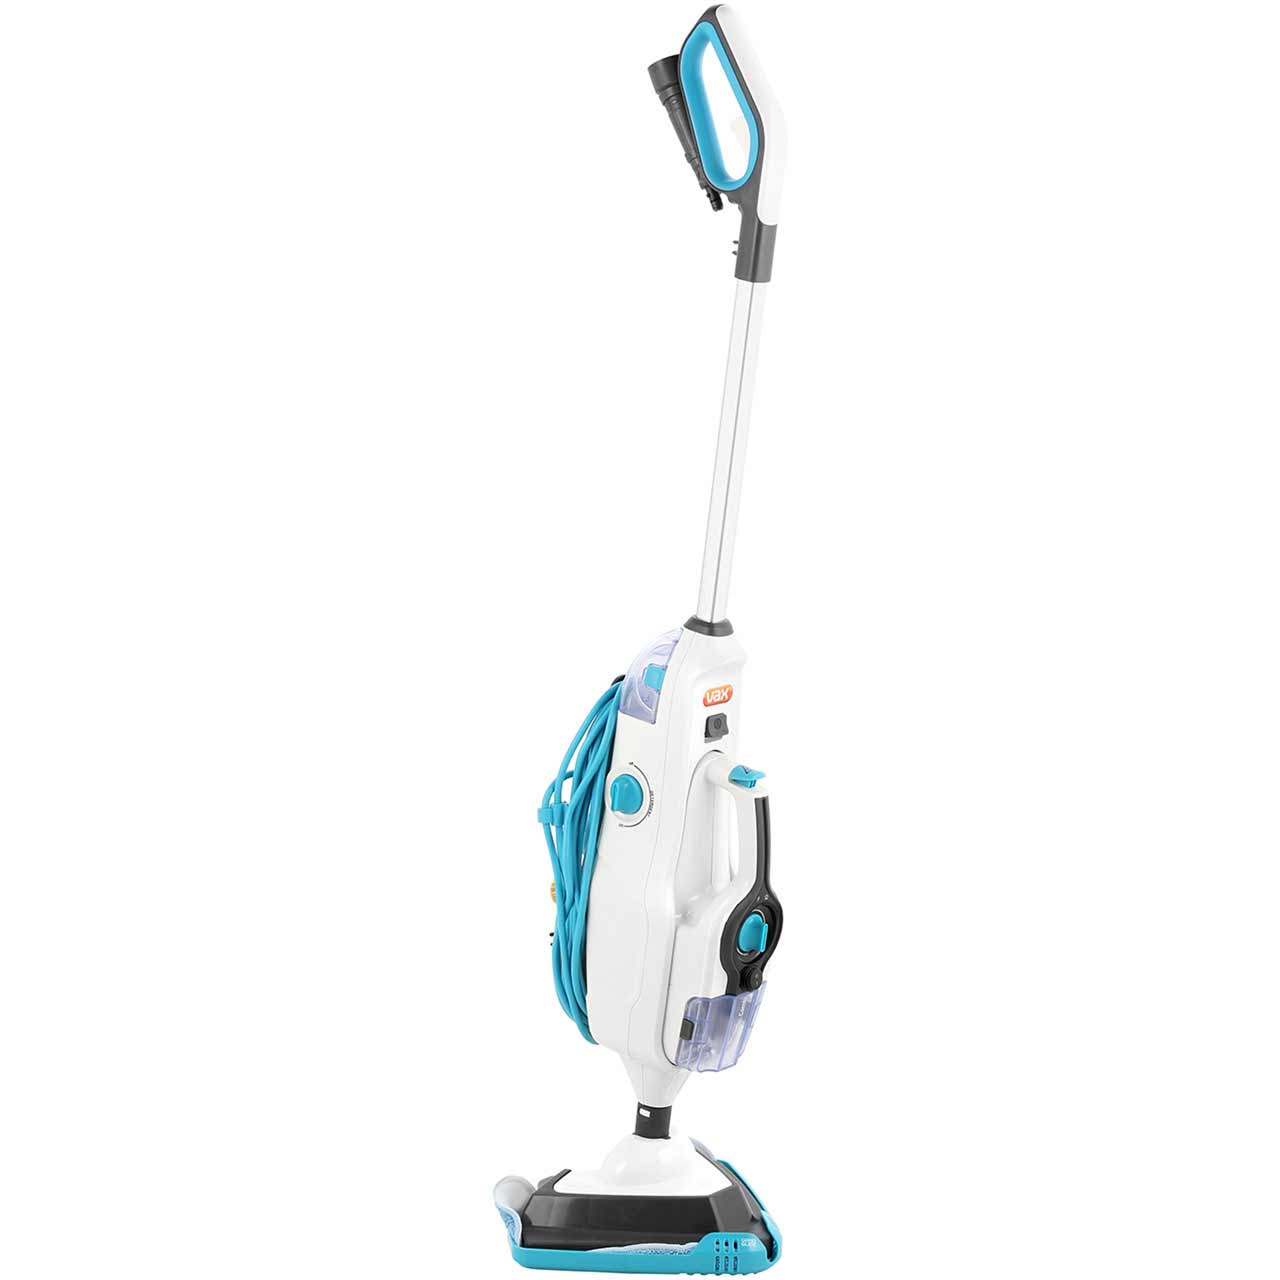 Vax Steam Fresh Combi 15-In-1 S86-SF-C Steam Mop with Detachable Handheld and up to 15 Minutes Run Time Review